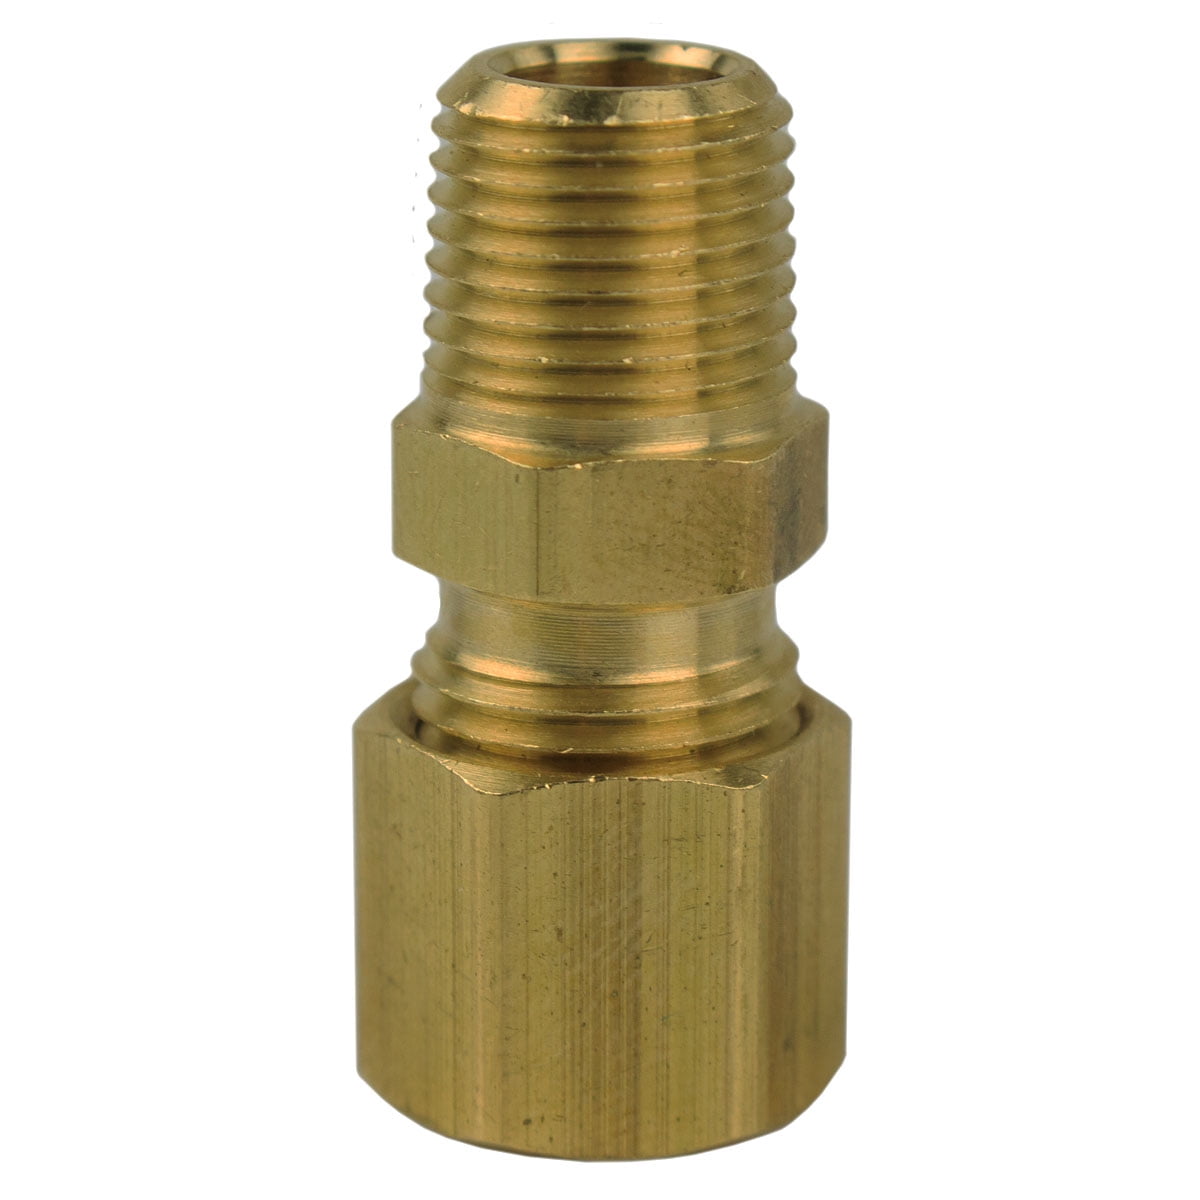 NPT3/8 Male x Ф3/8 Tube OD with Double Ferrules 3pcs NPT3/8 Male x Ф3/8 Tube OD with Double Ferrules 3pcs uxcell Compression Tube Fitting Connector Adapter 